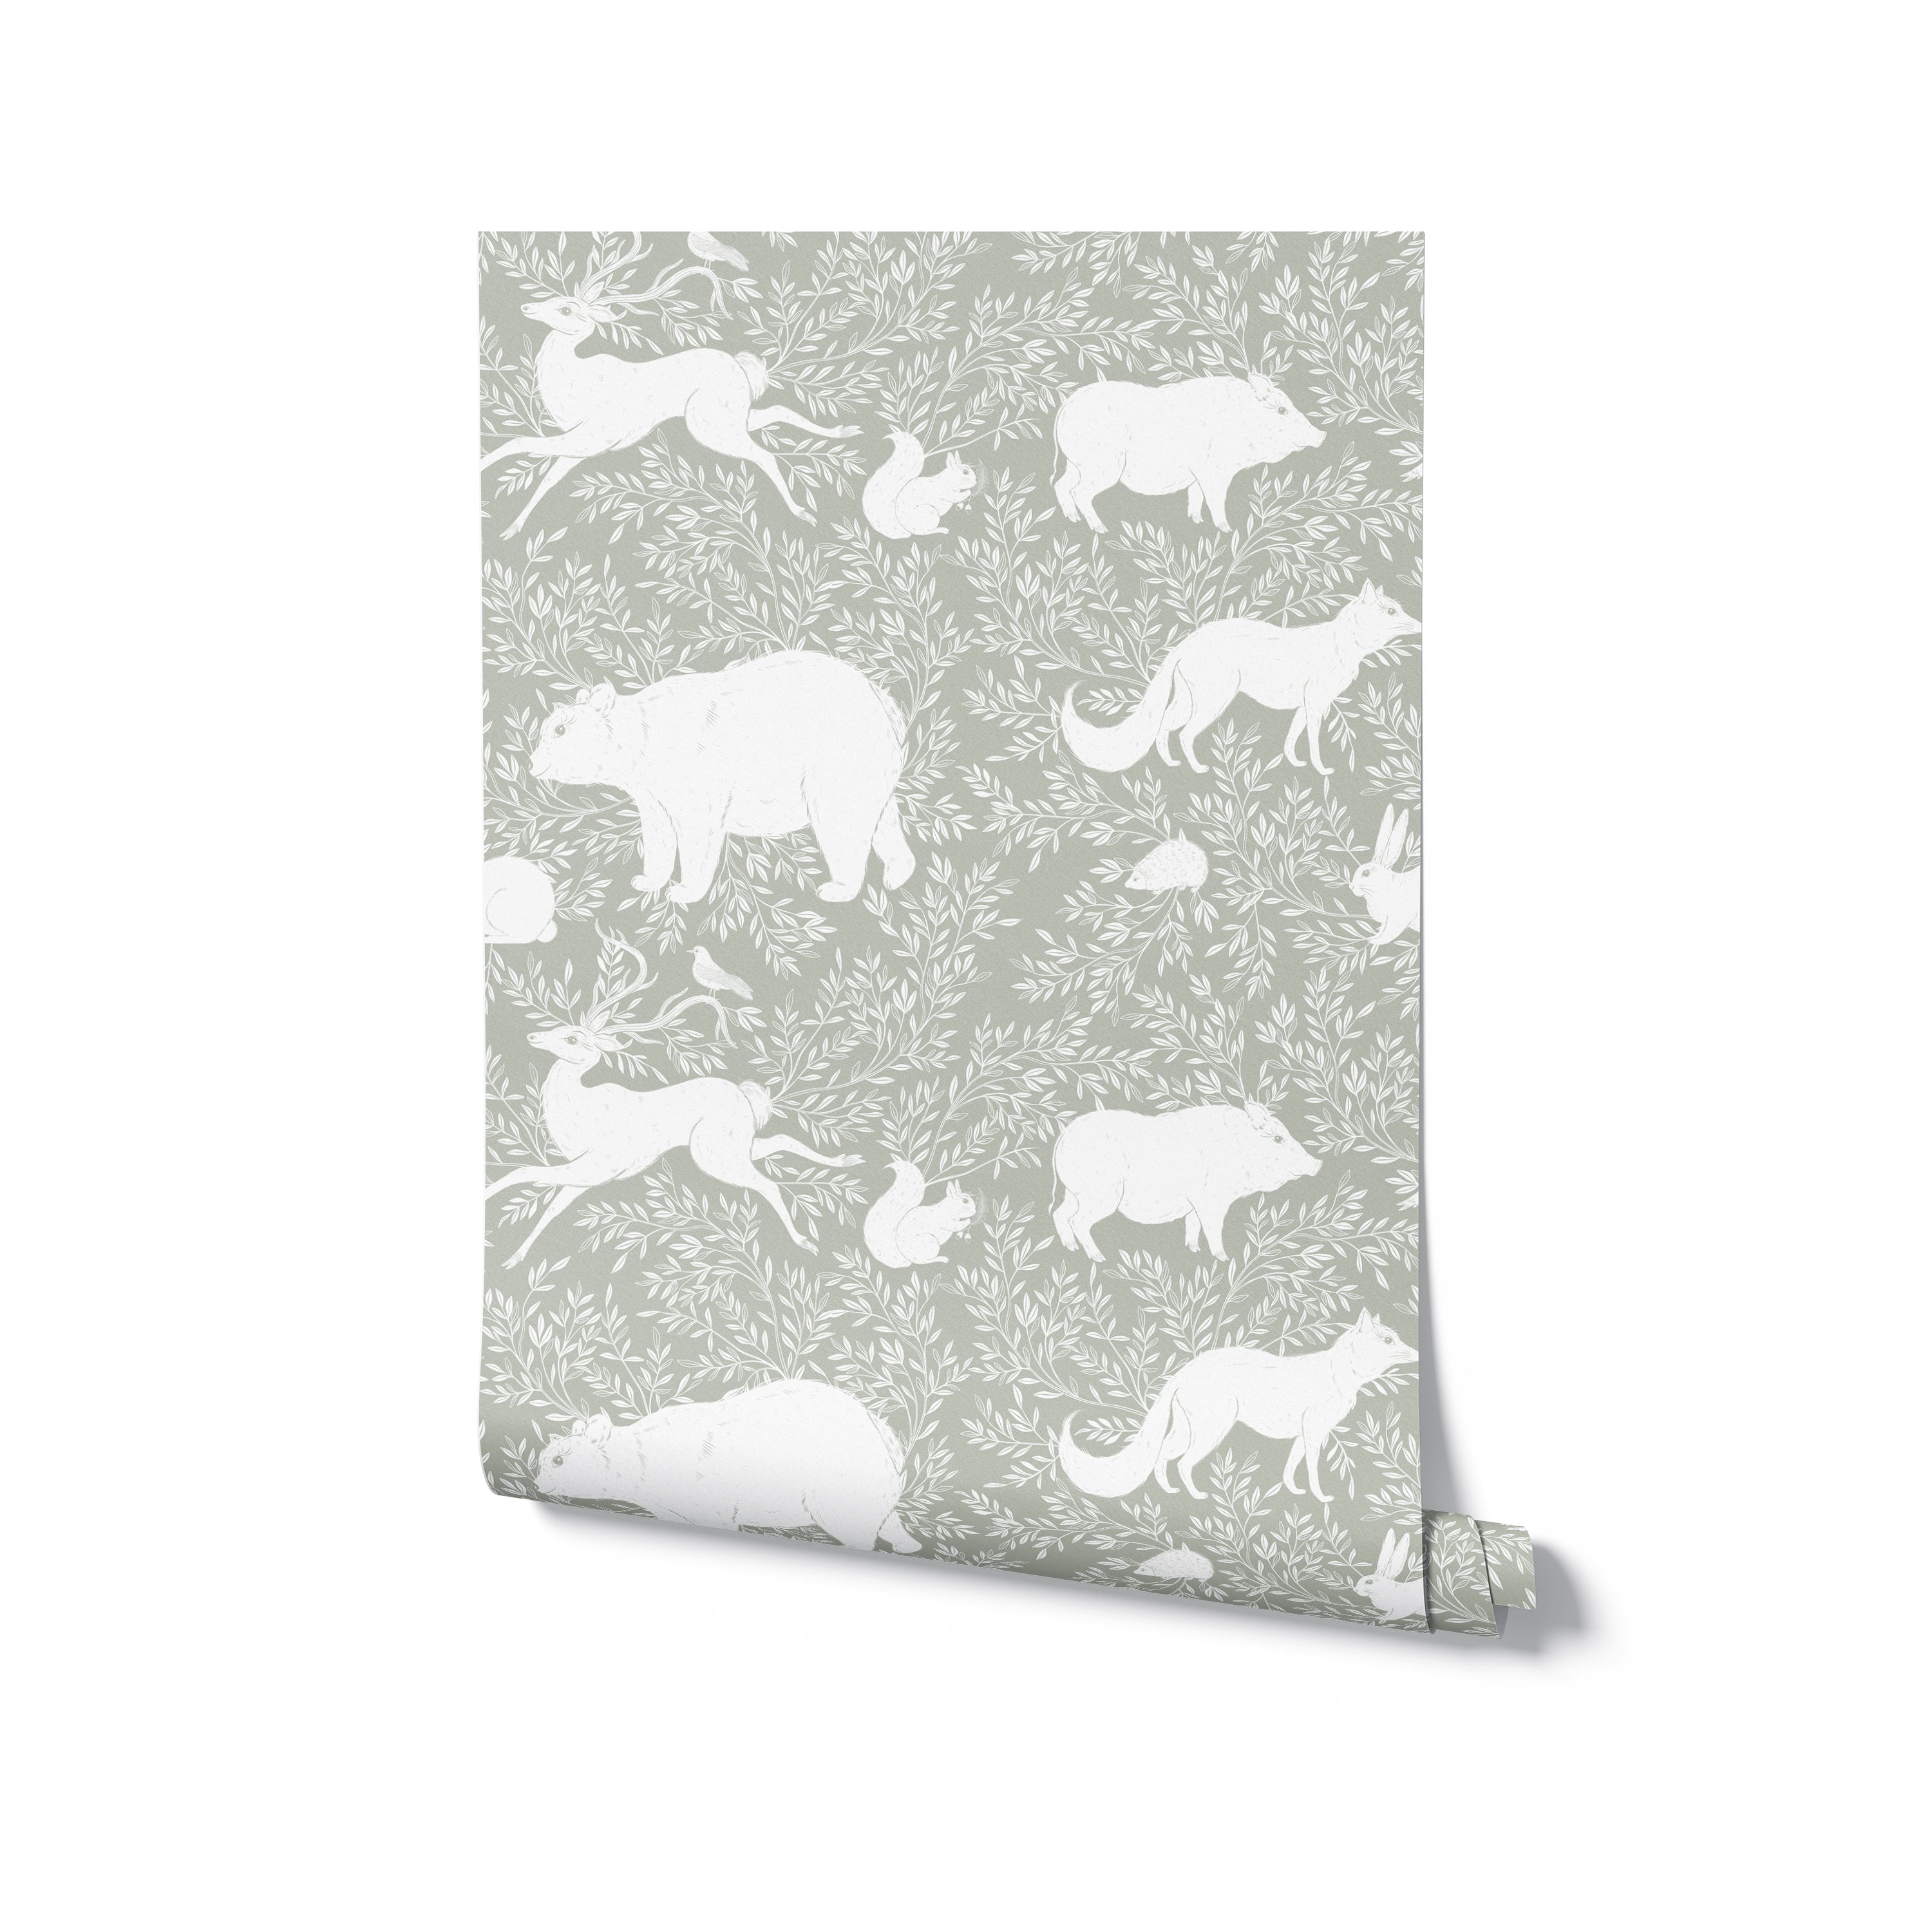 A roll of green wallpaper showcasing a pattern of white woodland animals including bears, foxes, and rabbits, creating a charming and nature-inspired design suitable for various interior settings